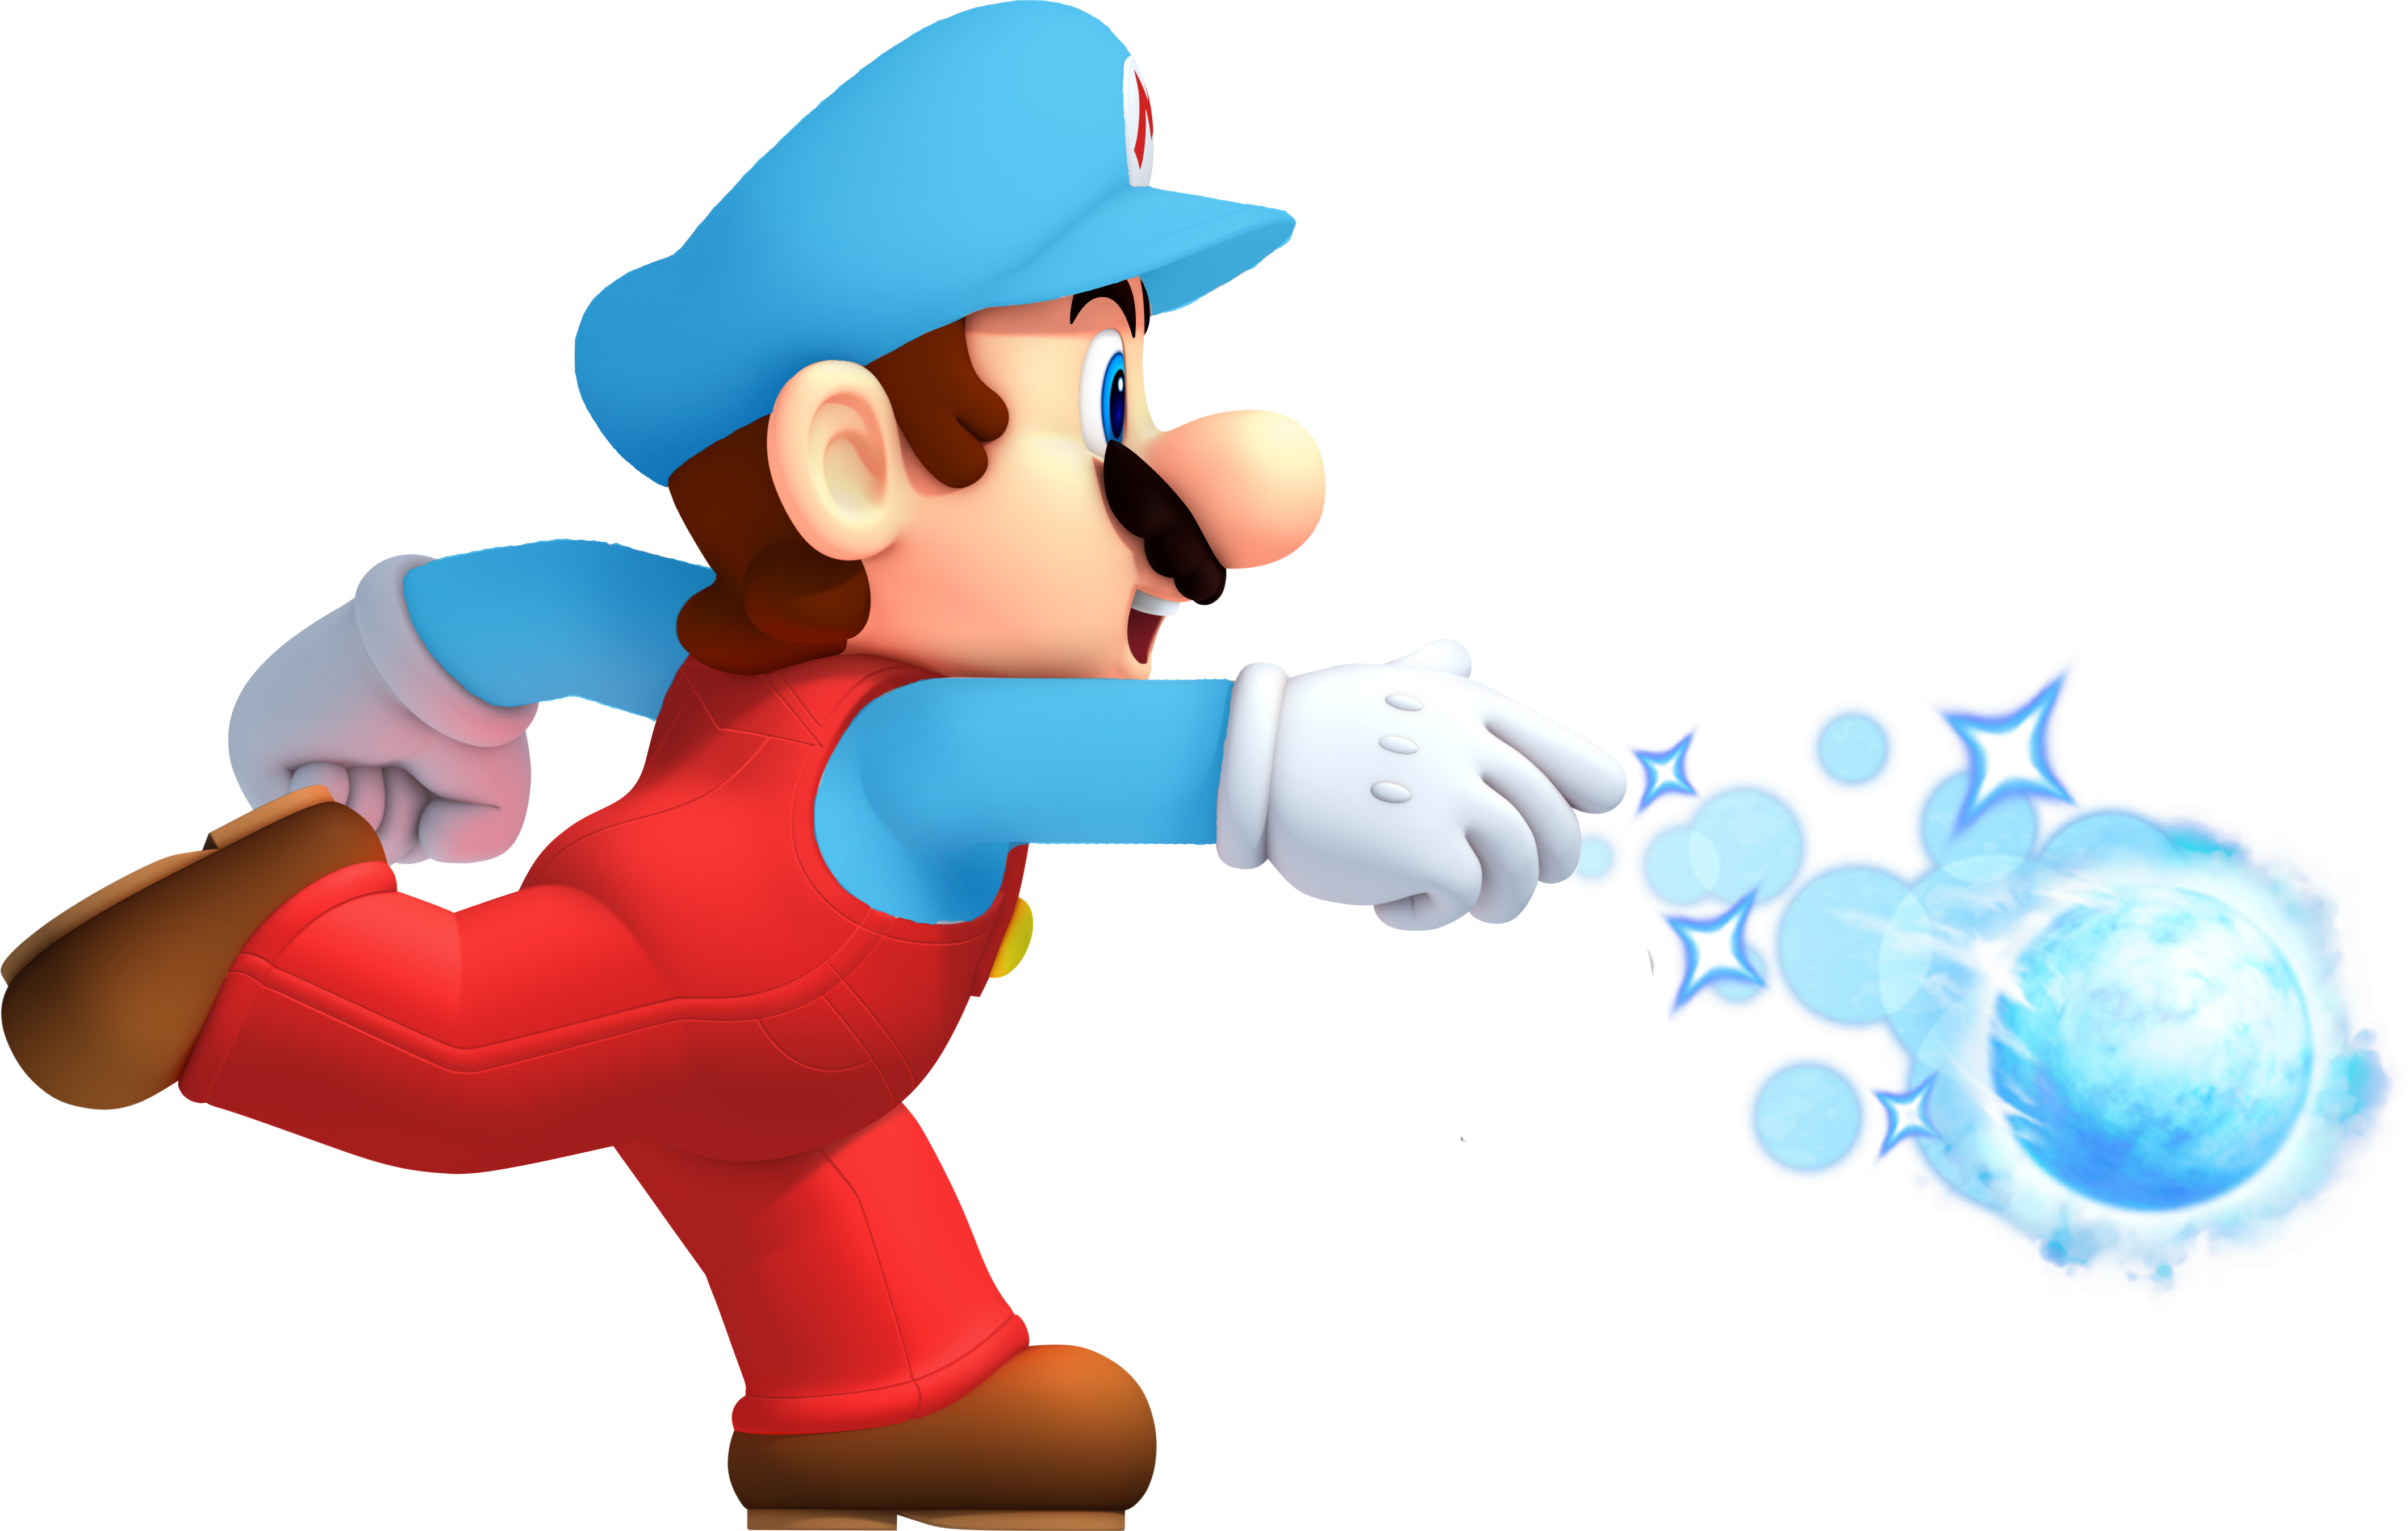 Icemario - - Throwing Ice At Someone (4240x2696)